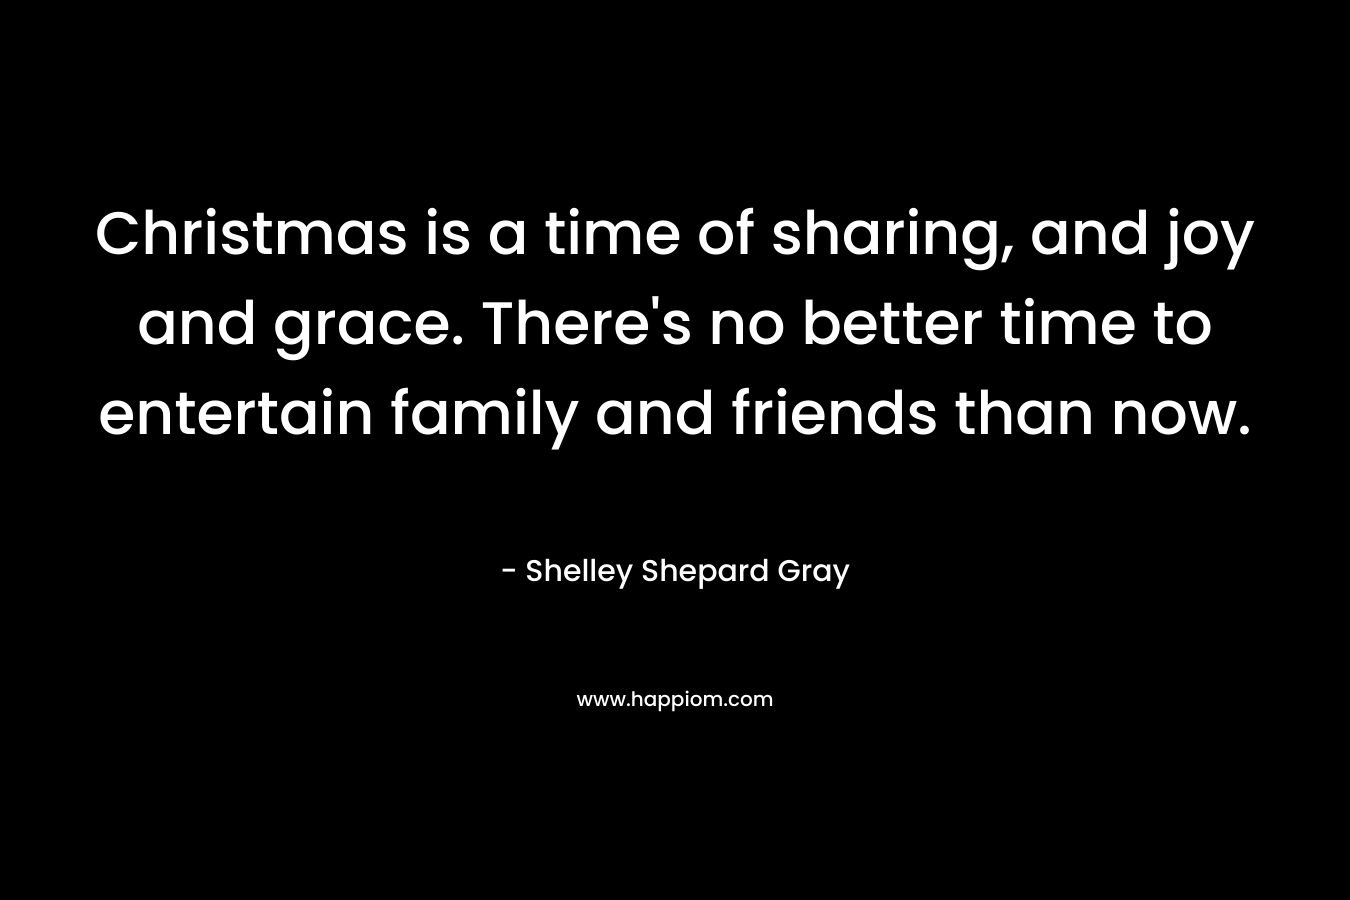 Christmas is a time of sharing, and joy and grace. There’s no better time to entertain family and friends than now. – Shelley Shepard Gray